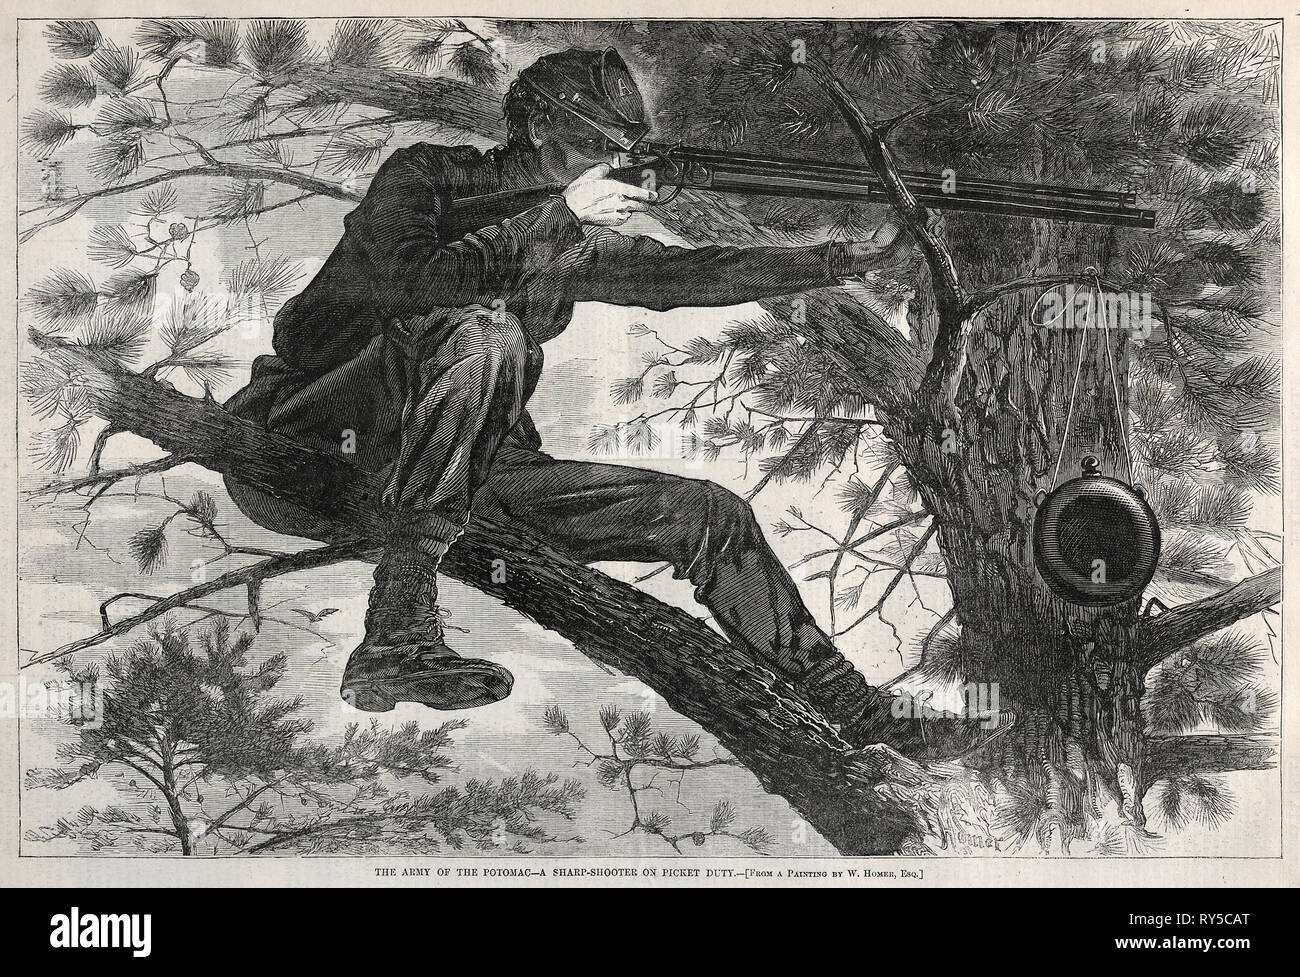 A Sharpshooter on Picket Duty. Winslow Homer (American, 1836-1910). Wood engraving Stock Photo